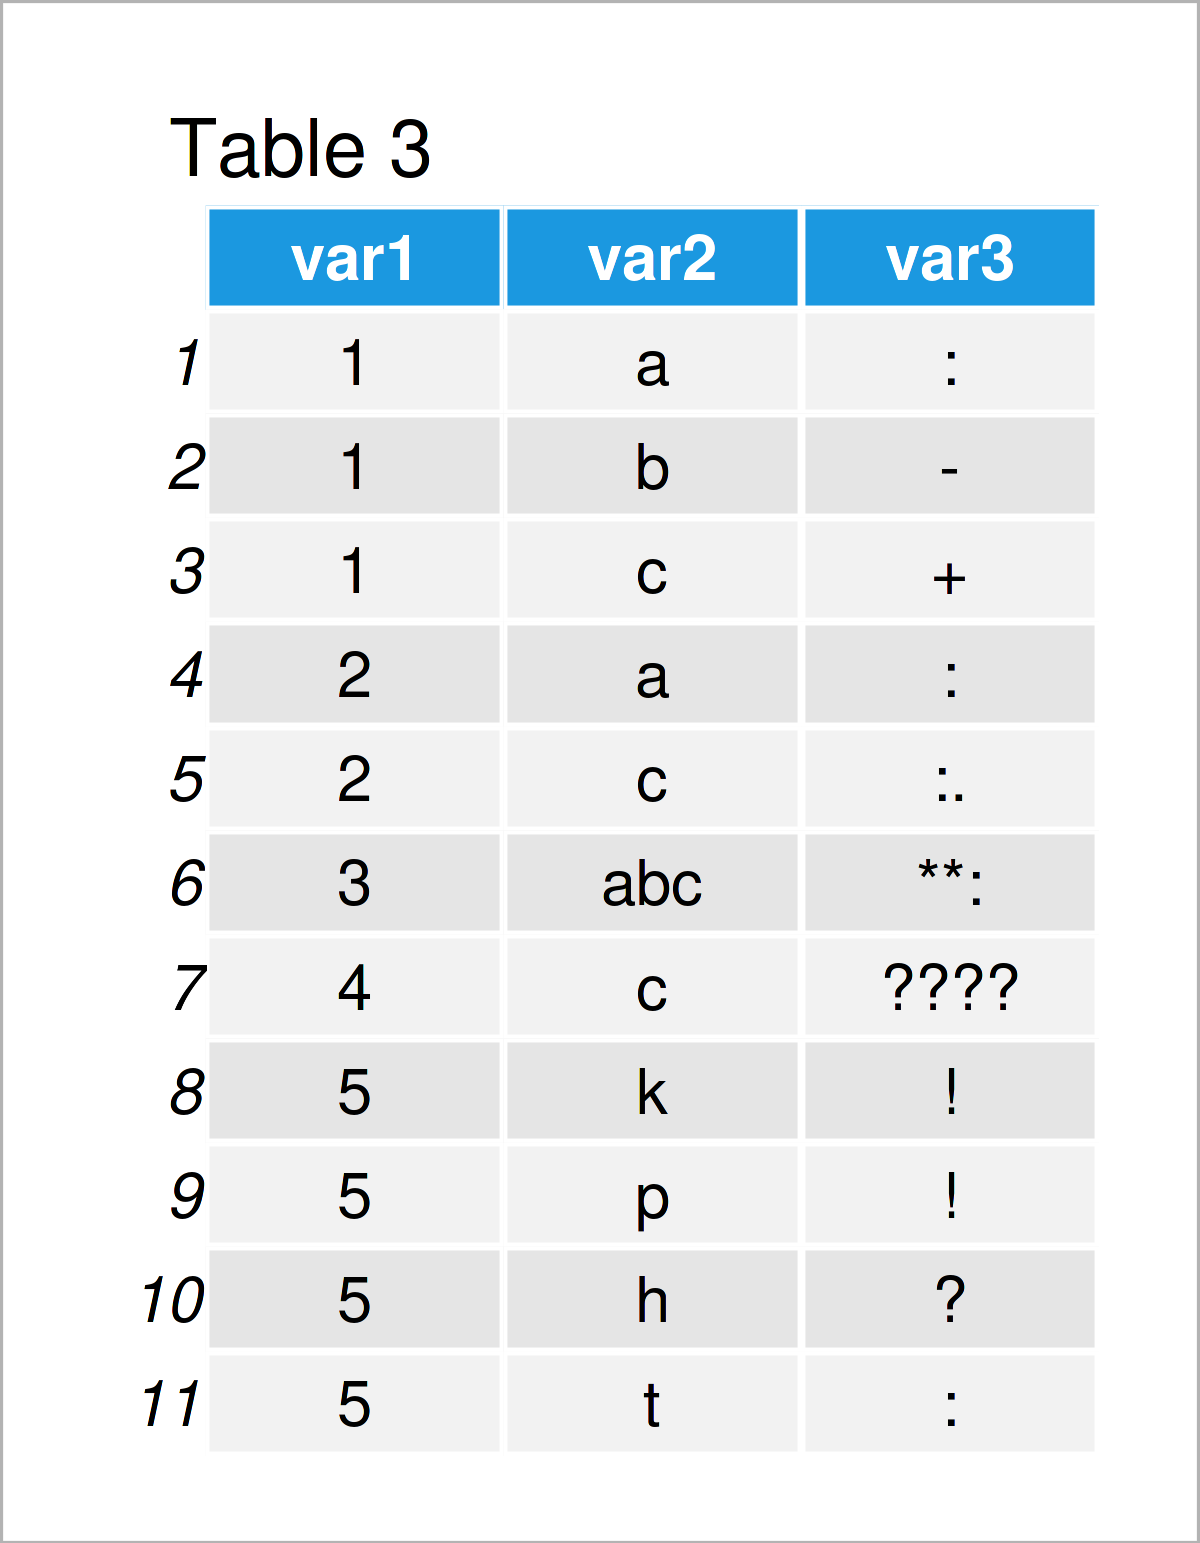 table 3 tbl_df split comma separated character strings column separate rows r